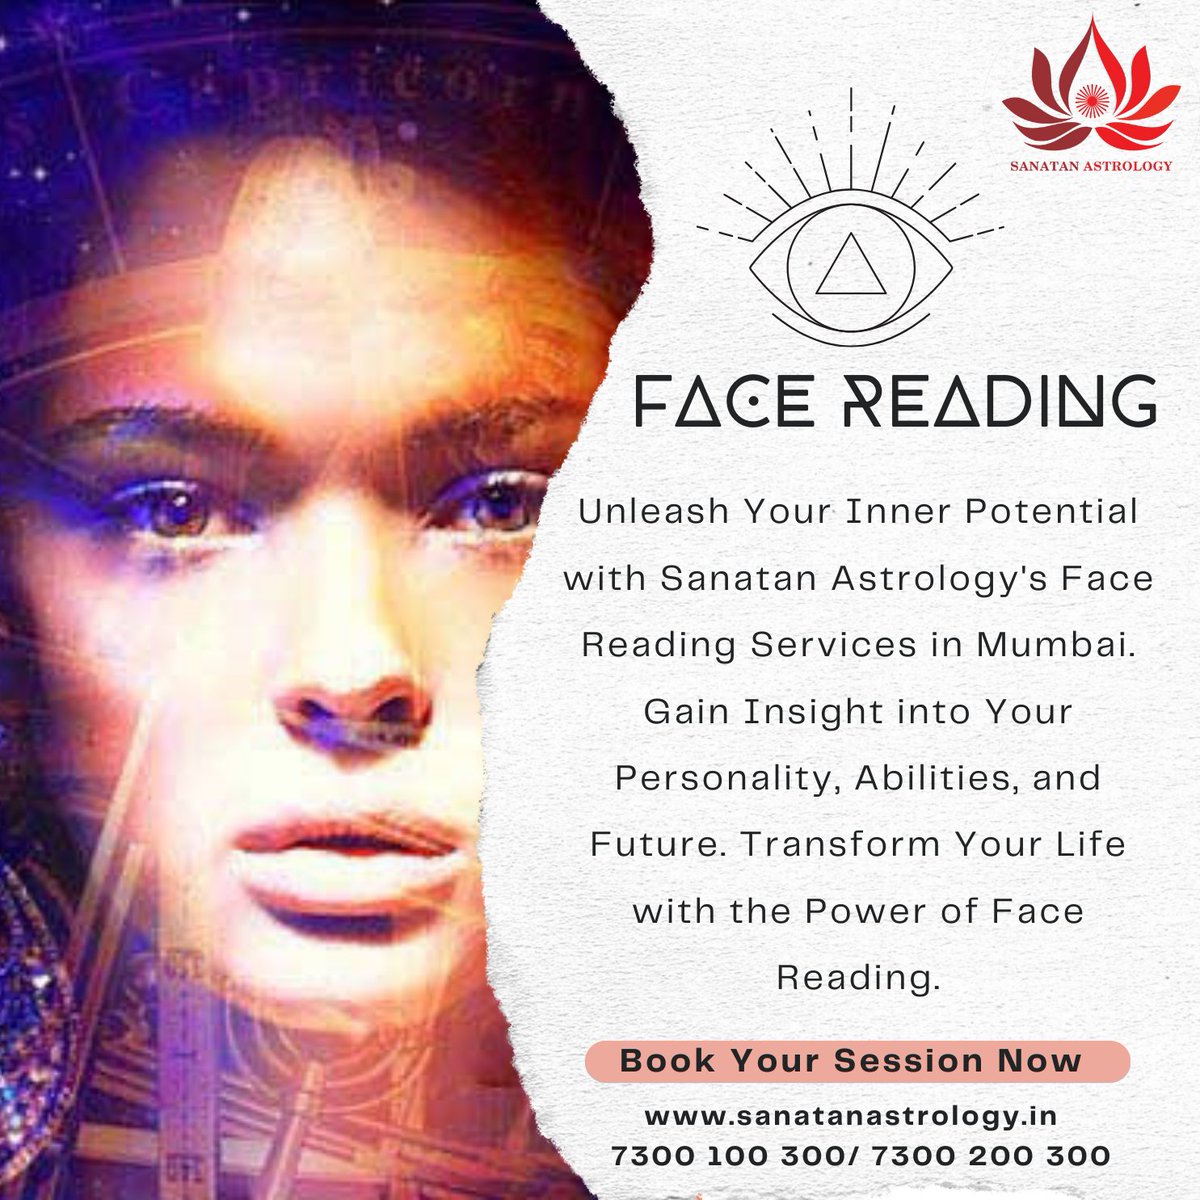 ▪︎Best Face Reading Astrology in india : Unleash Your Inner Potential with Sanatan Astrology's Face Reading Services in Mumbai. 

#SanatanAstrology #FaceReading #Mumbai #Transformation #DiscoverYourself #UnlockYourPotential #LifeChangingExperience